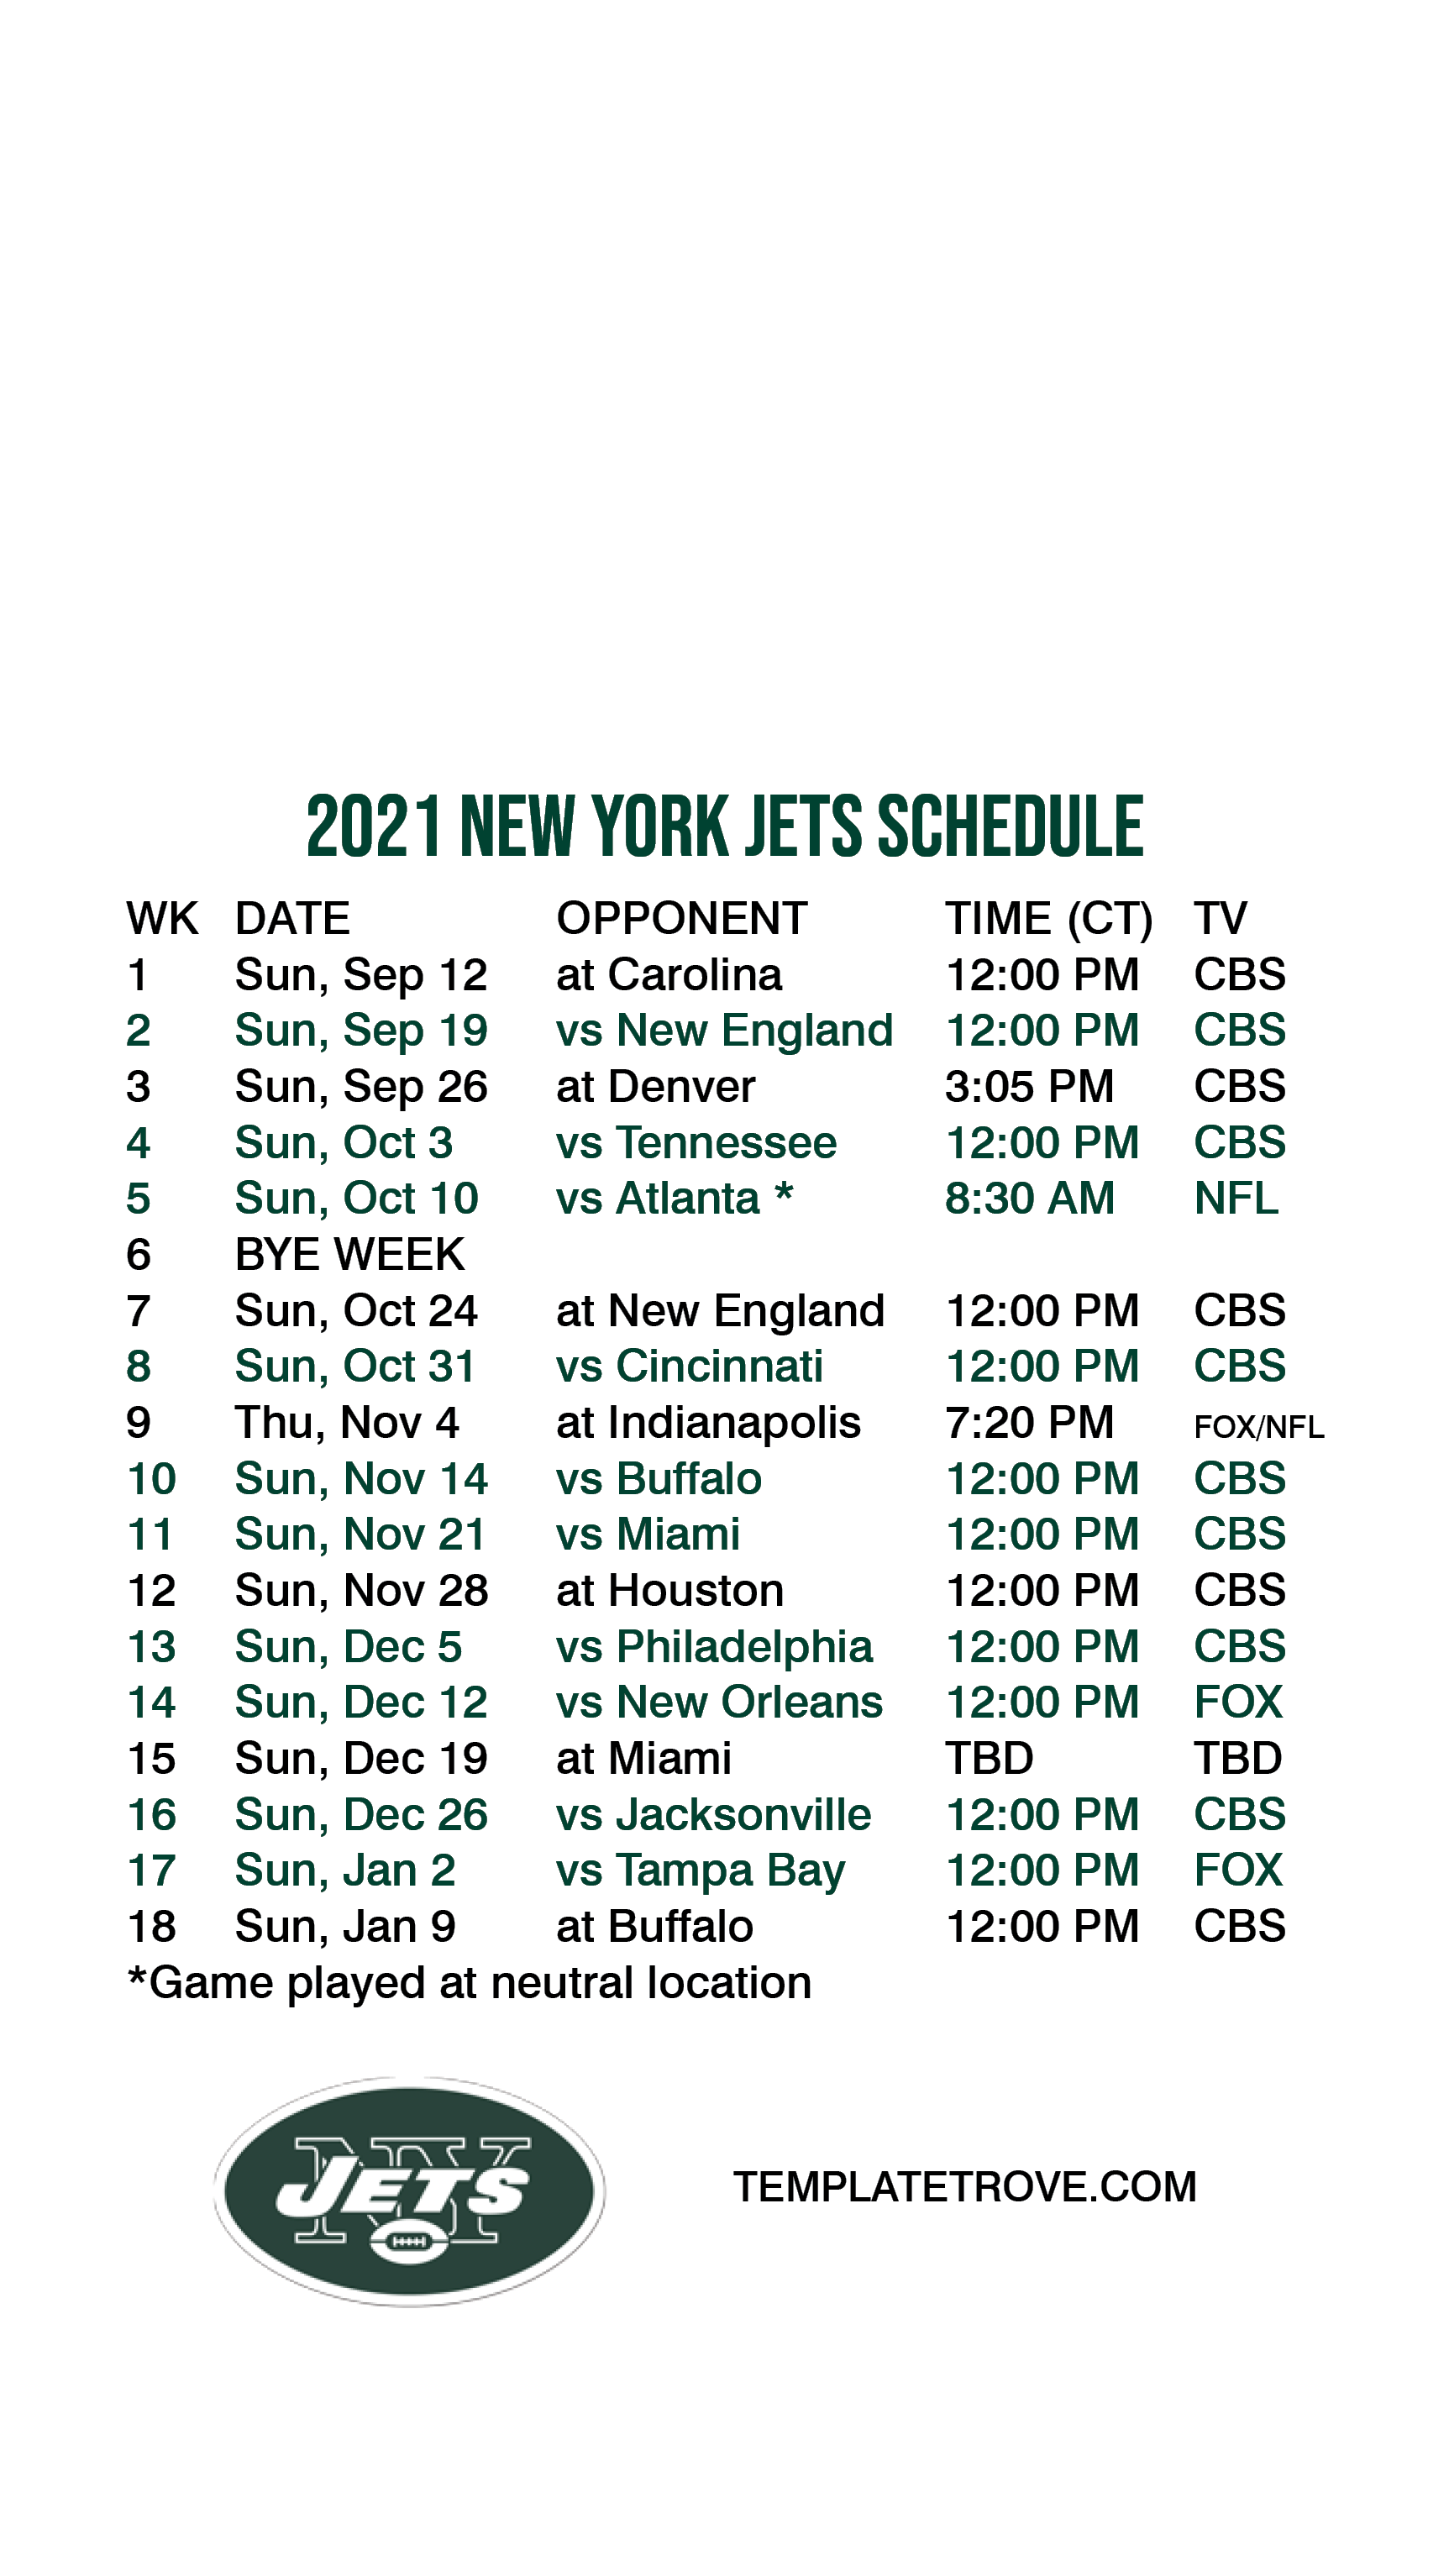 How to watch the New York Jets: 2021-22 season schedule, TV